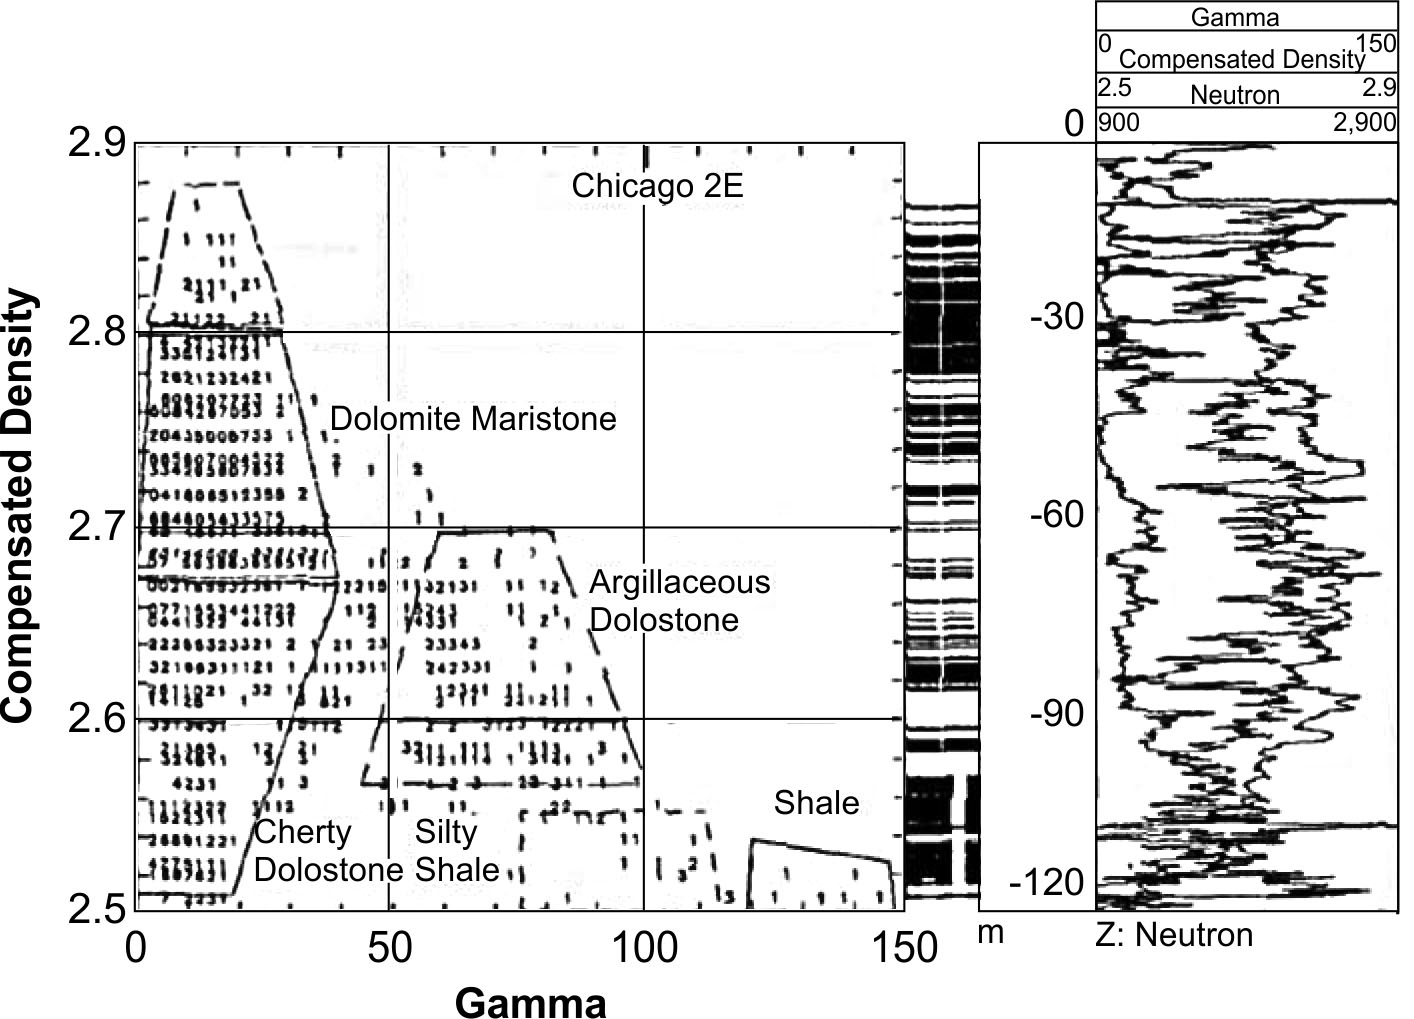 Three-dimensional "Z-plot" of gamma, density, and neutron log response of a test hole in the Chicago area.